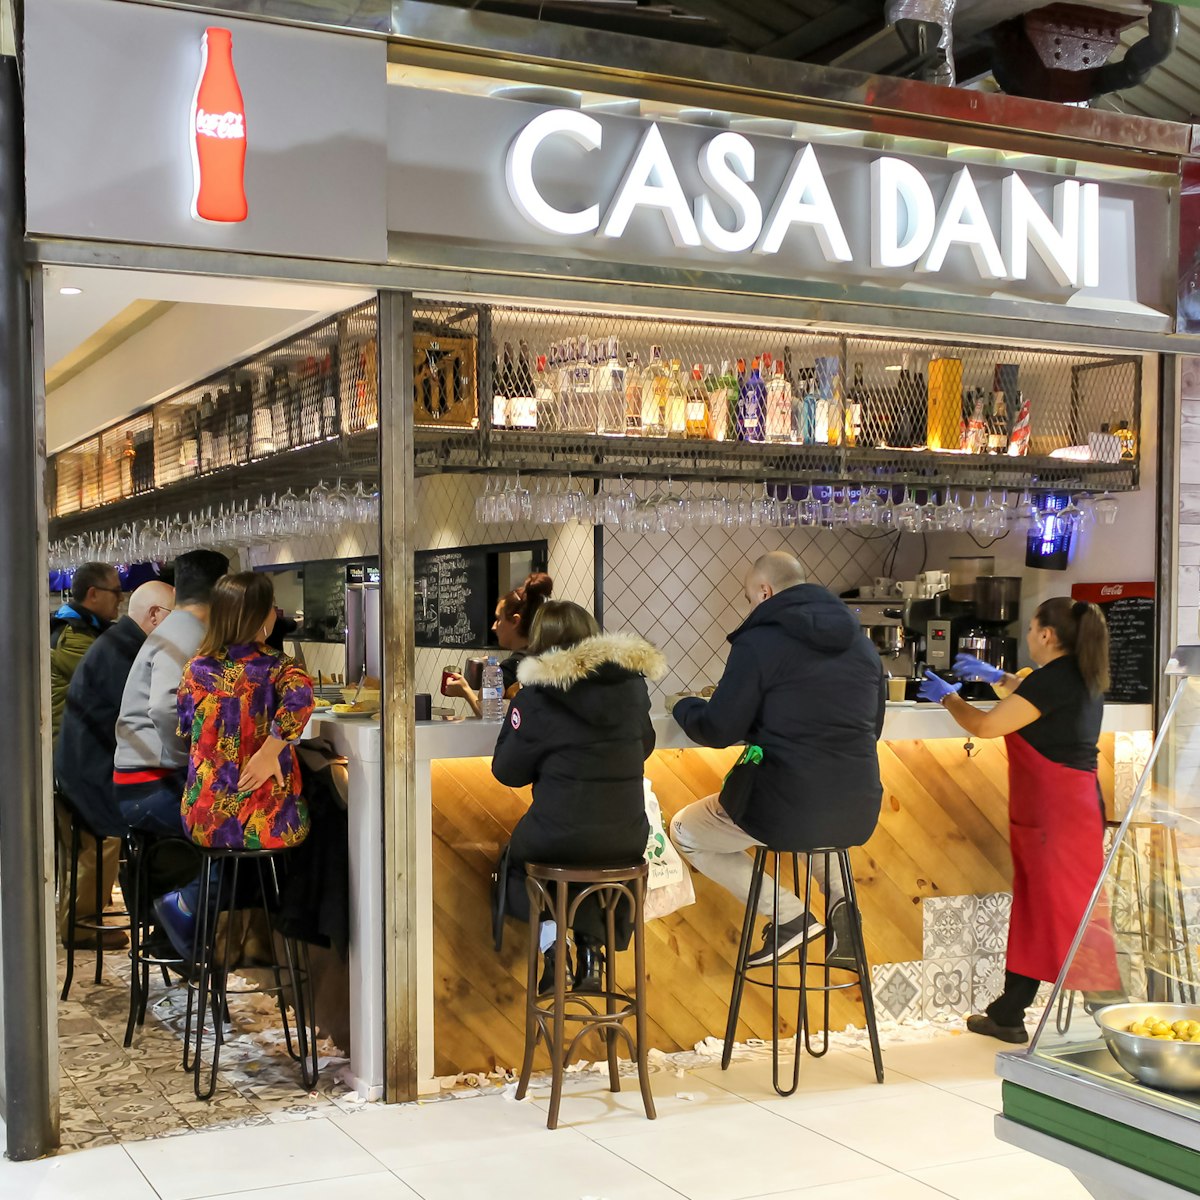 Casa Dani in Madrid is a popular, long-running counter in a covered market serving tortillas de patatas & other tapas.